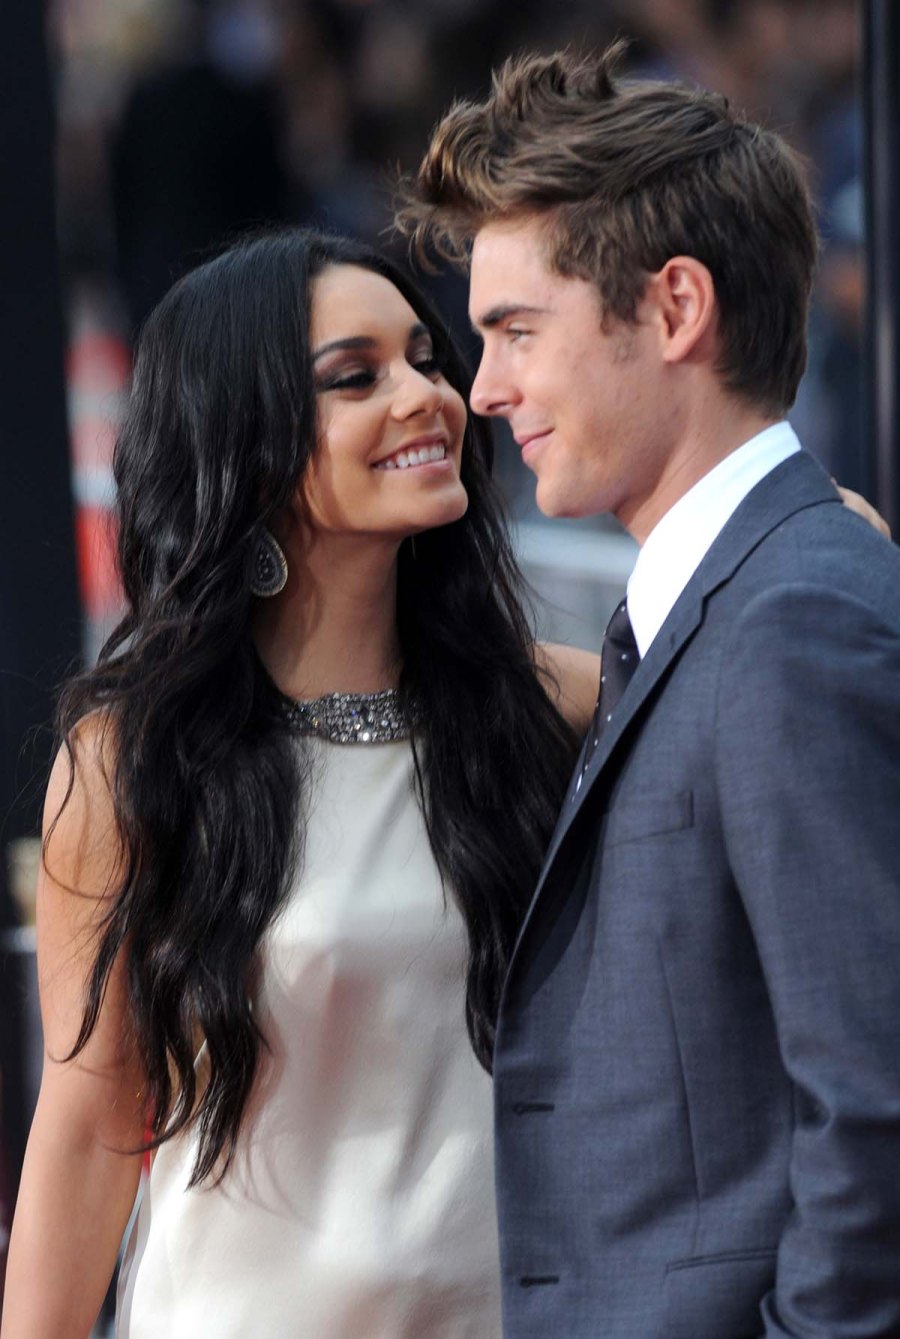 Zac Efron and Vanessa Hudgens: A Timeline of Their Relationship